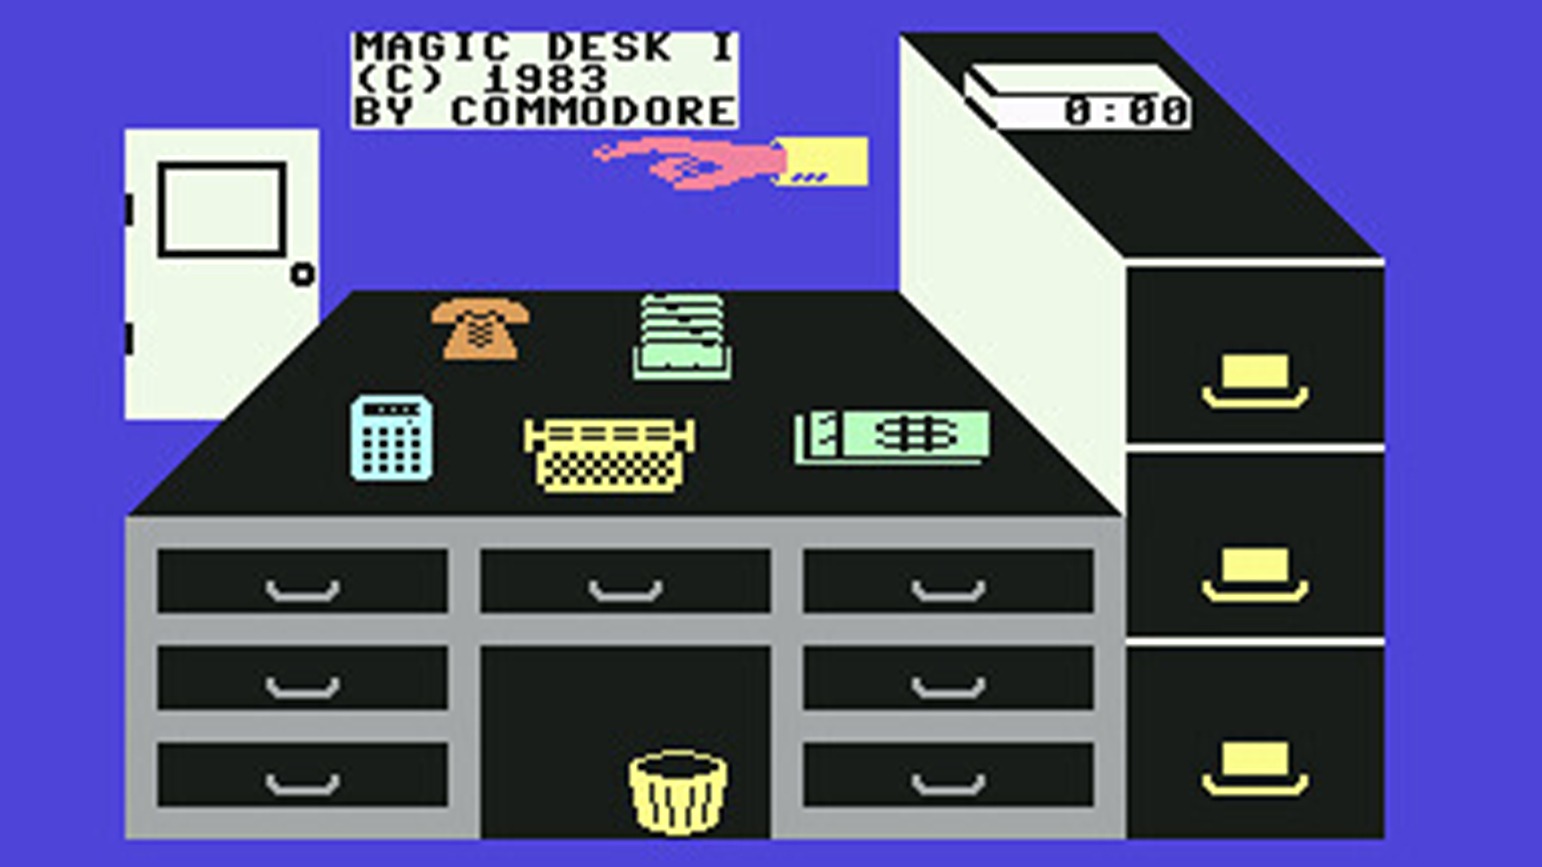 Highly pixelated graphic image of a desk from Commodore, 1983